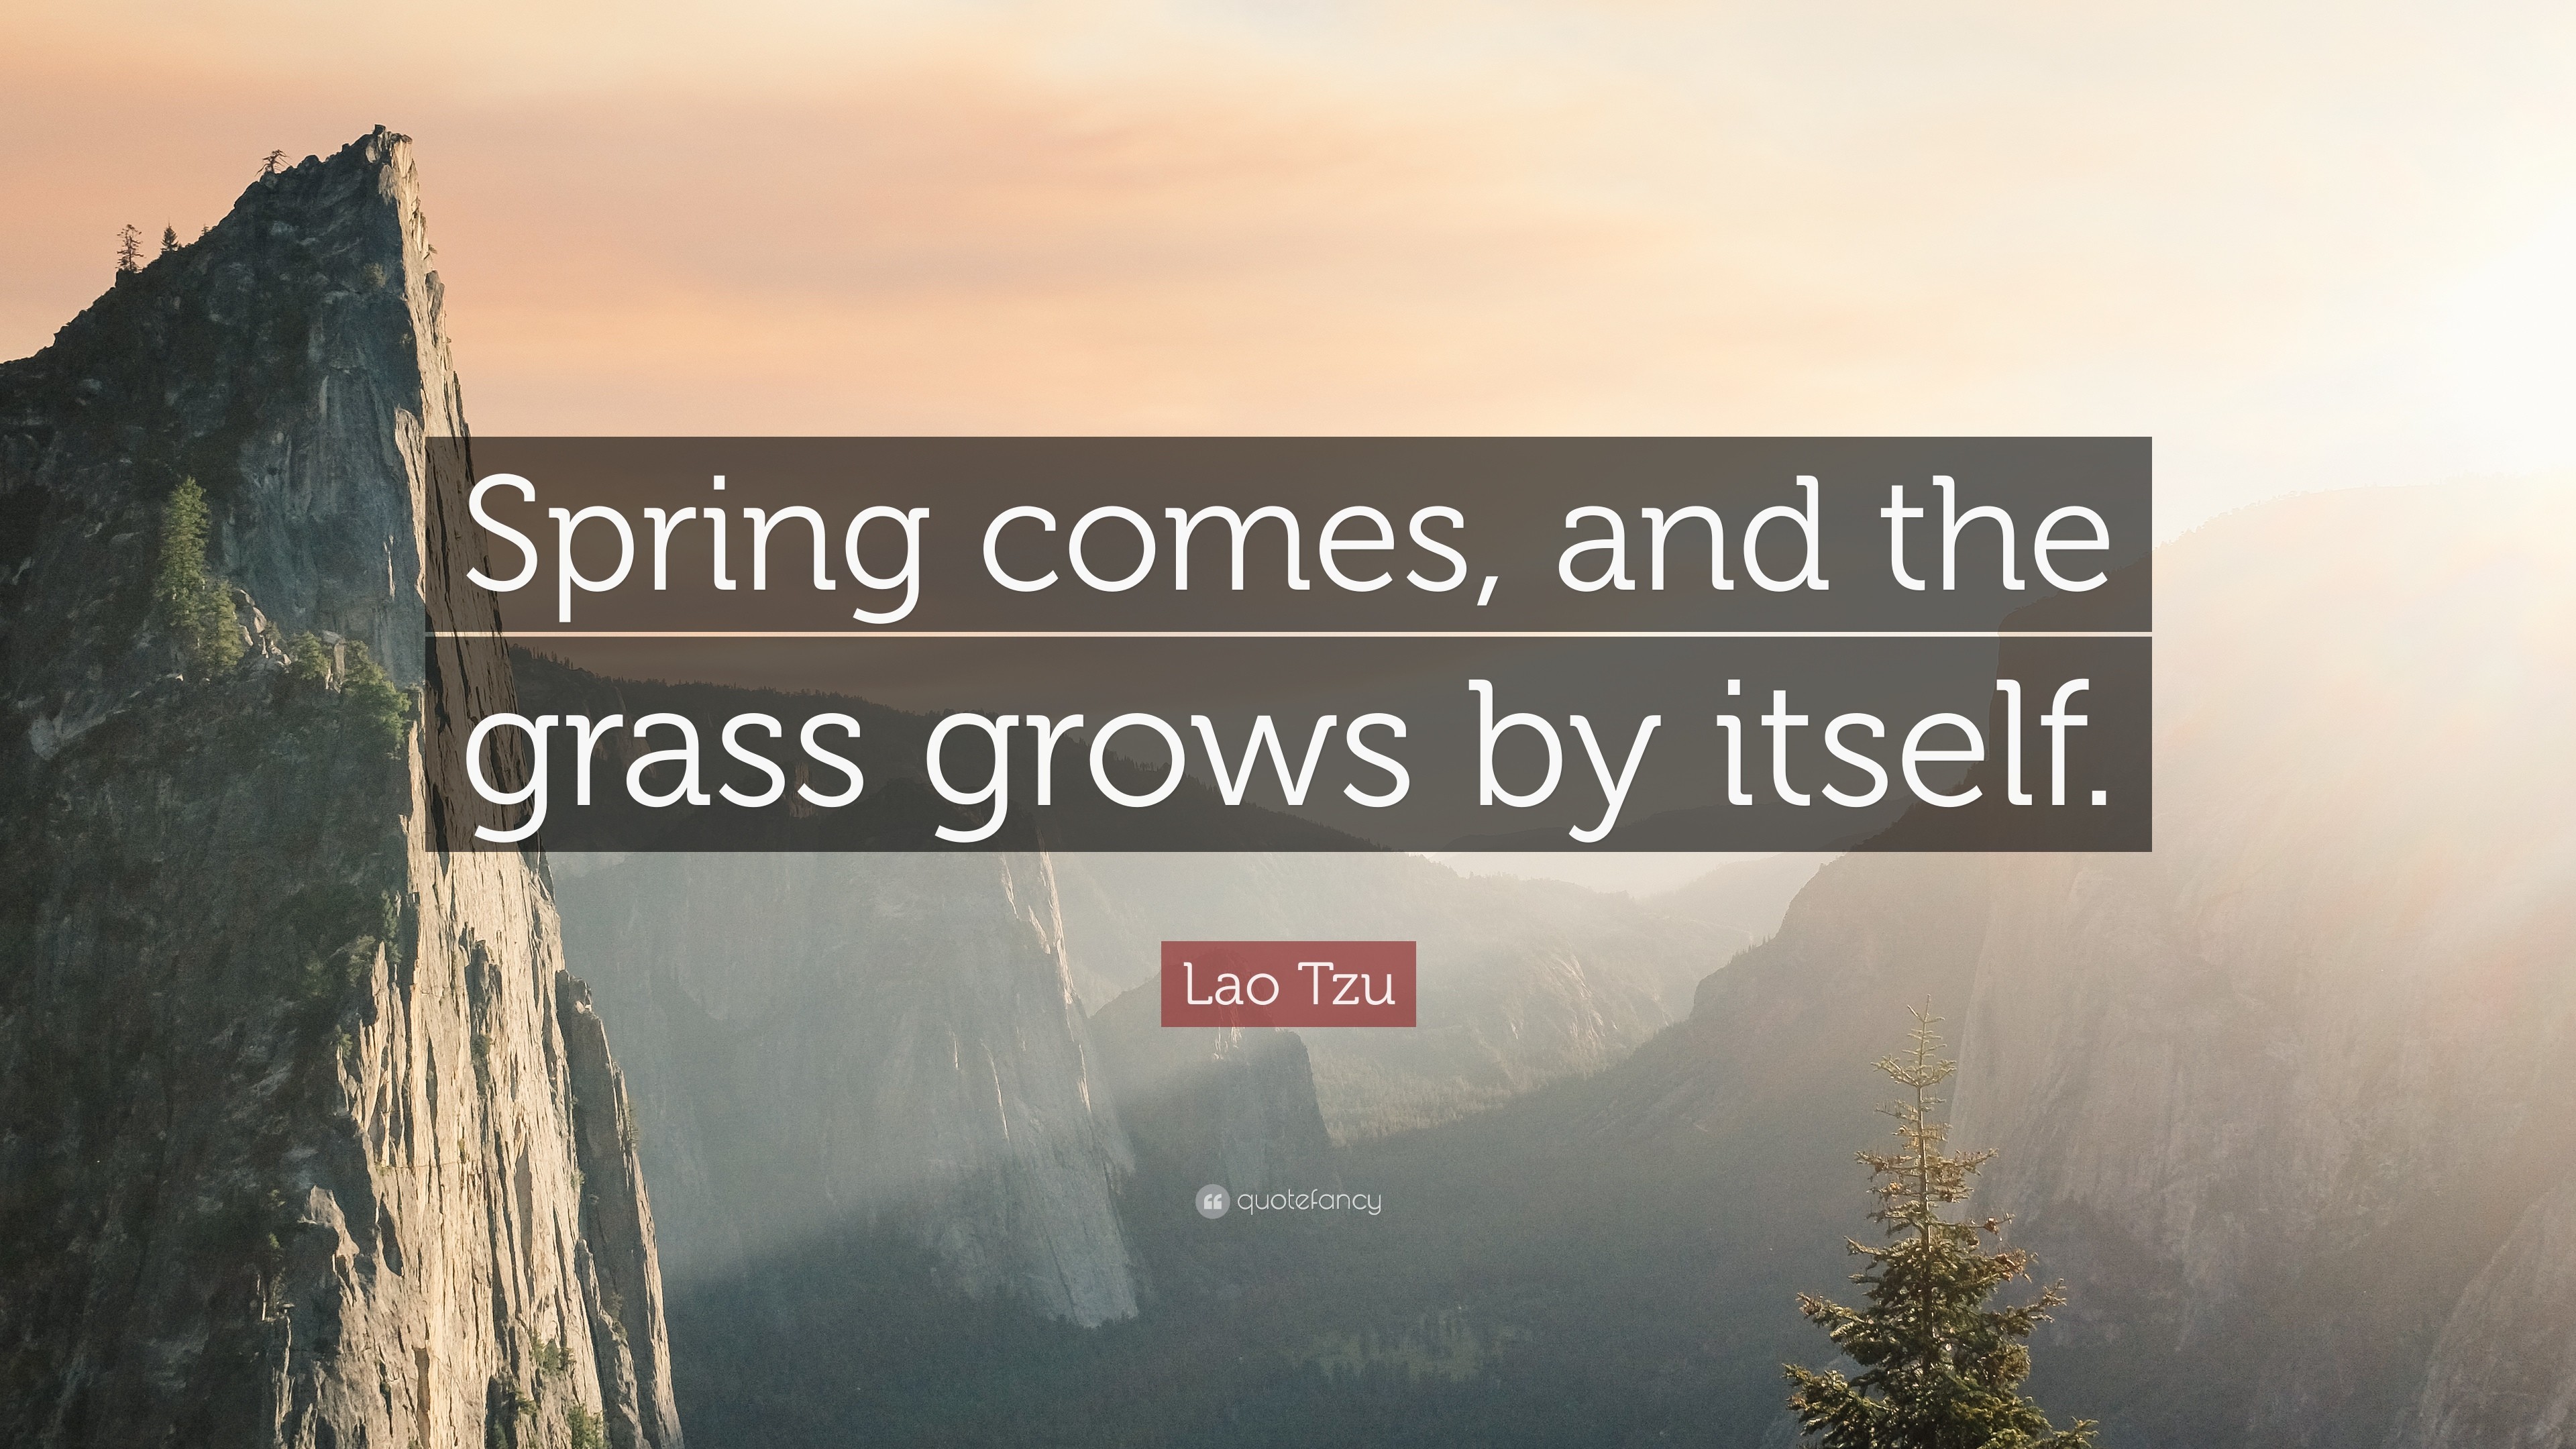 3840x2160 Lao Tzu Quote: “Spring comes, and the grass grows by itself.”